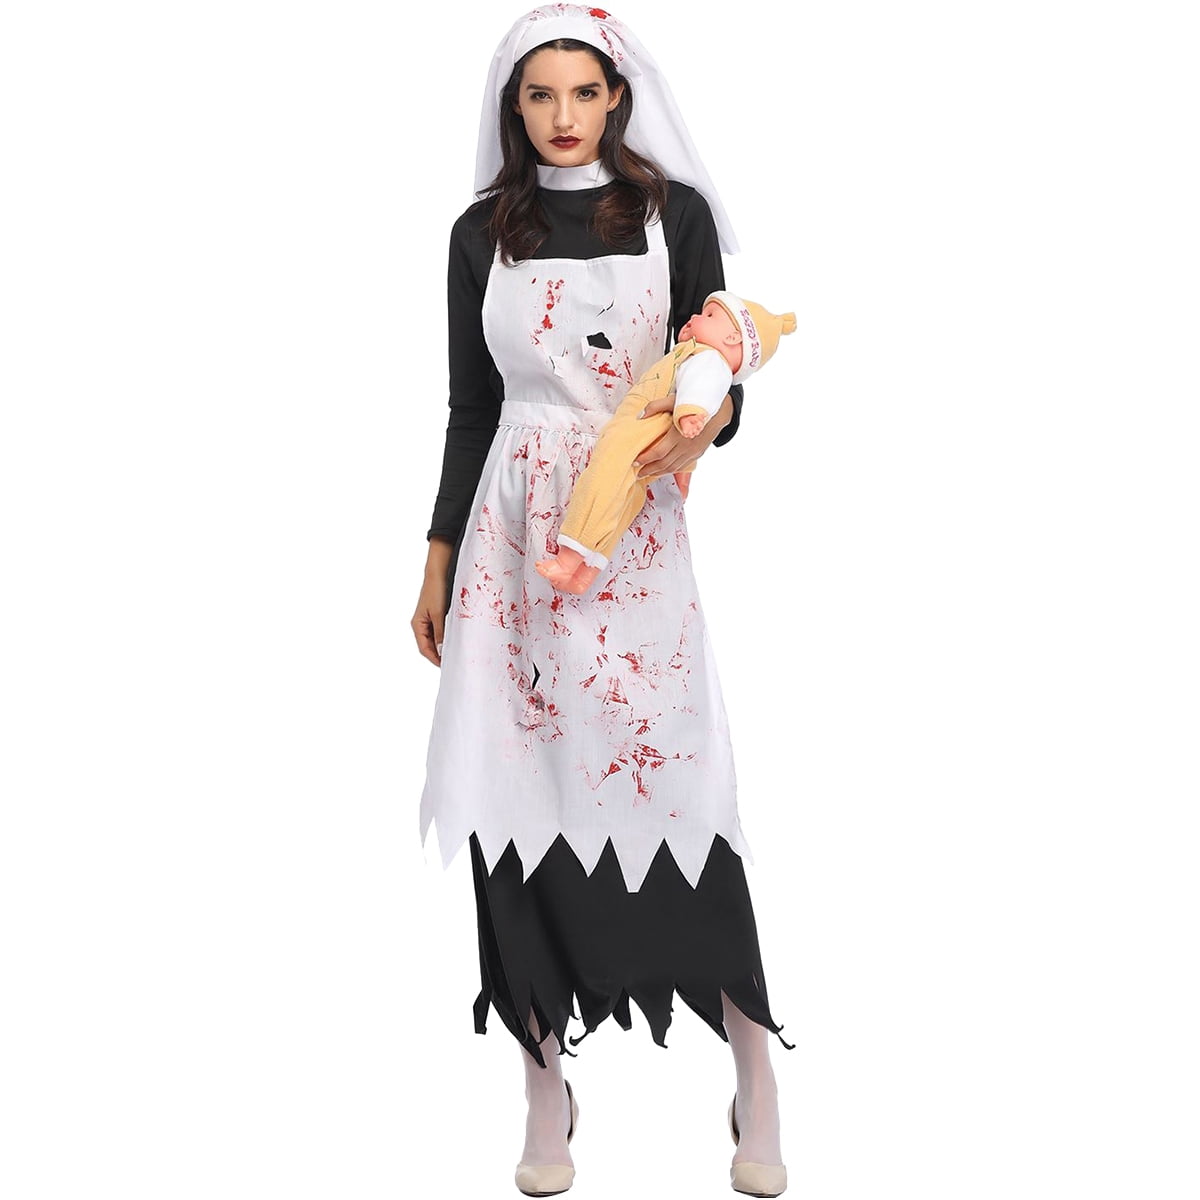 Bleeding Apron With 4 Weapons Adults Fancy Dress Gory Halloween Adults Costume 